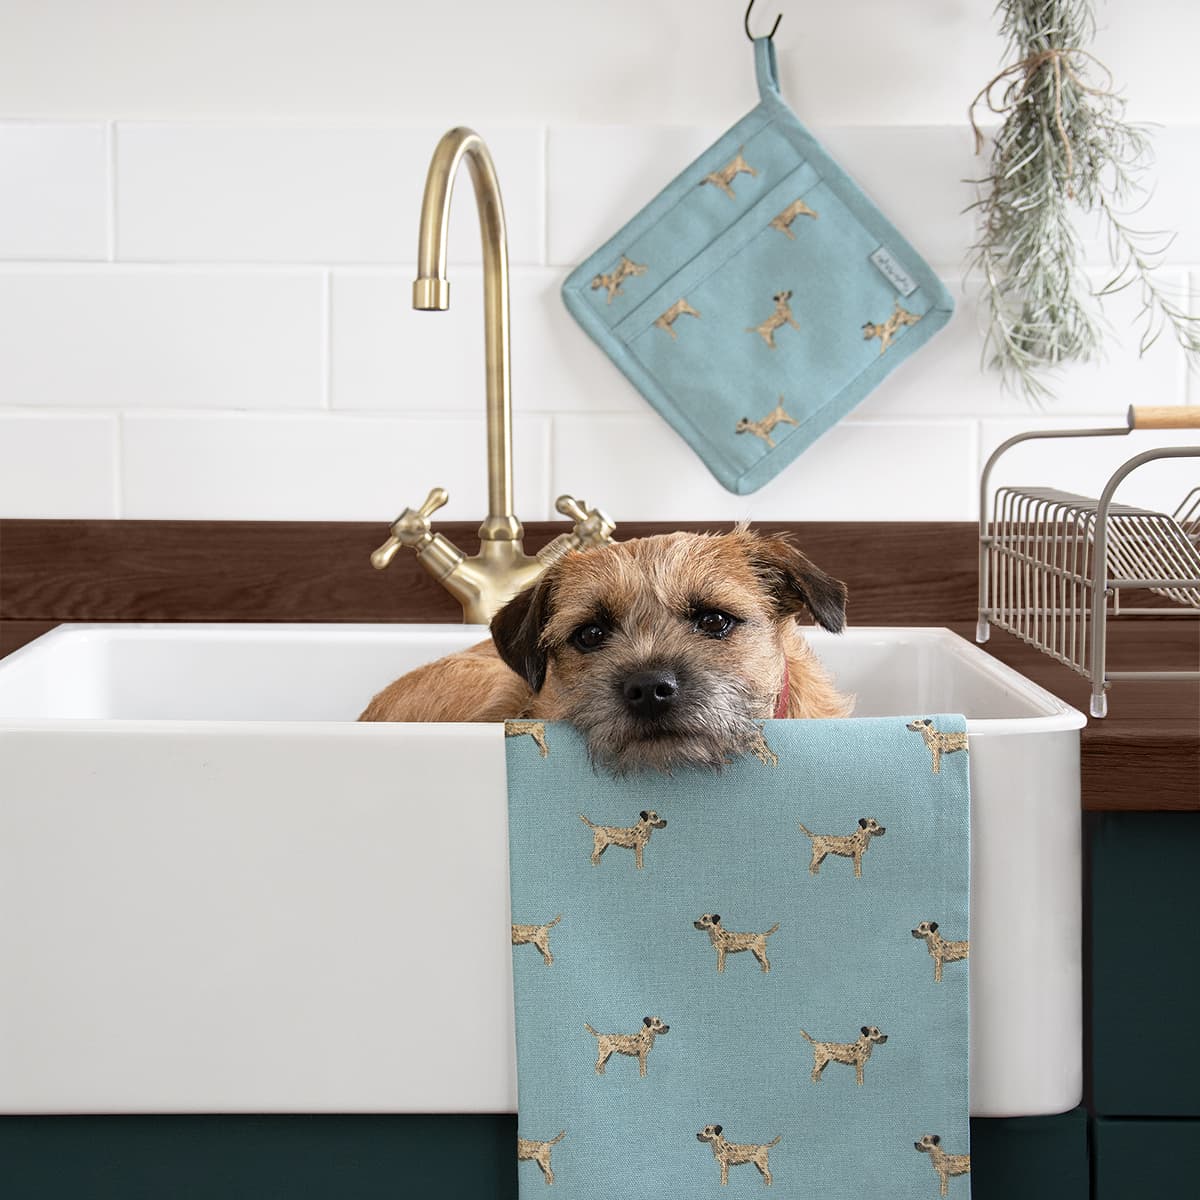 https://cdn.shopify.com/s/files/1/0201/1771/7092/products/all98602-all98125-border-terrier-tea-towel-set-of-2-and-pot-grab-lifestyle-high-res-square.jpg?v=1649340917